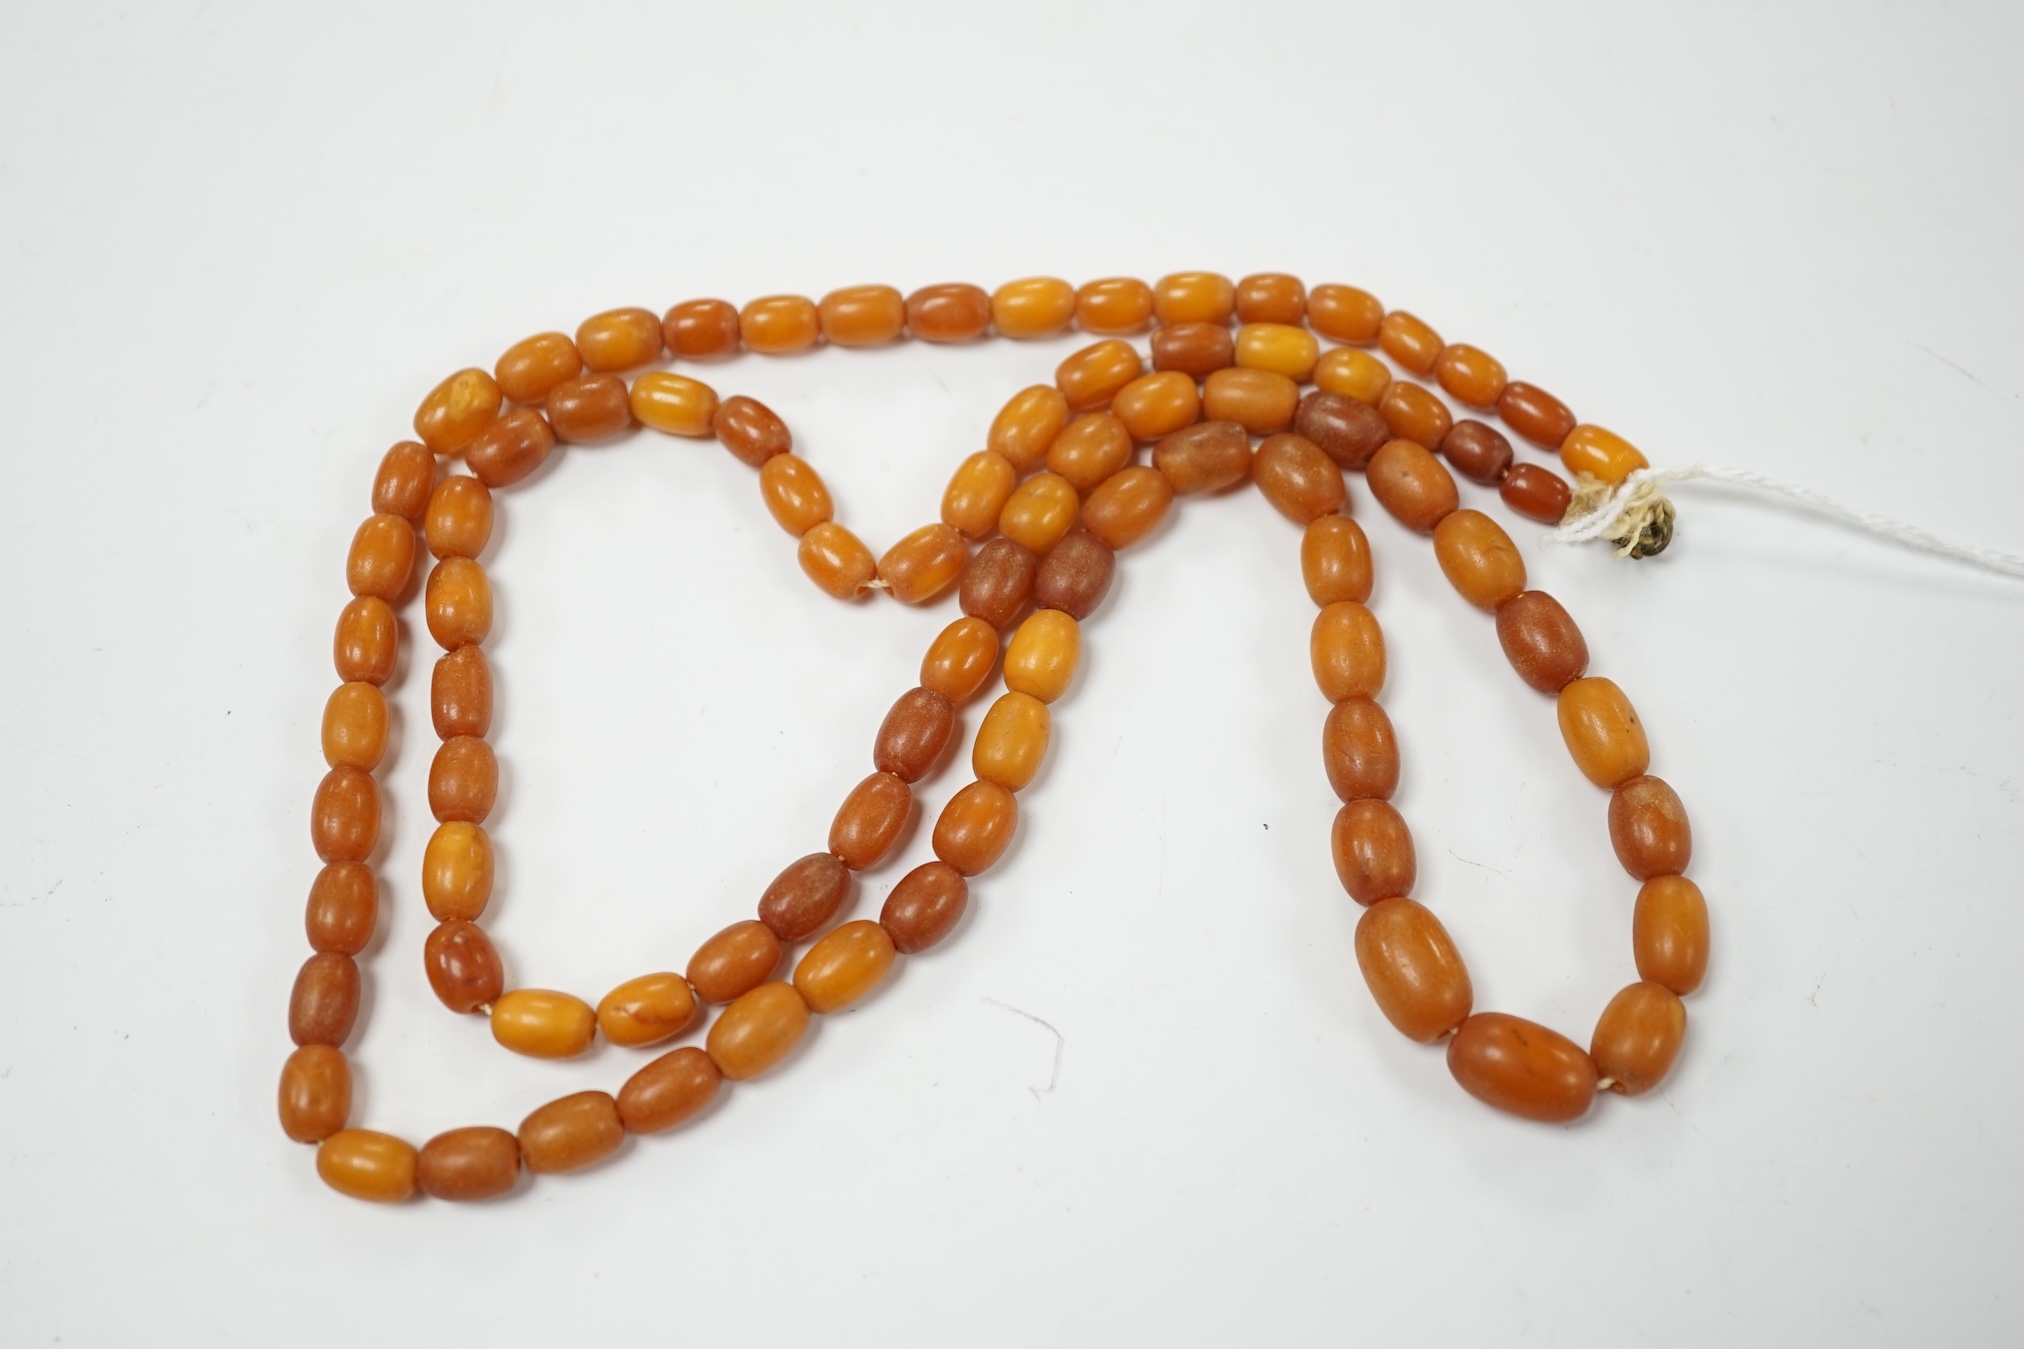 A single strand graduated amber bead necklace, 86cm, gross weight 30 grams. Condition - poor to fair